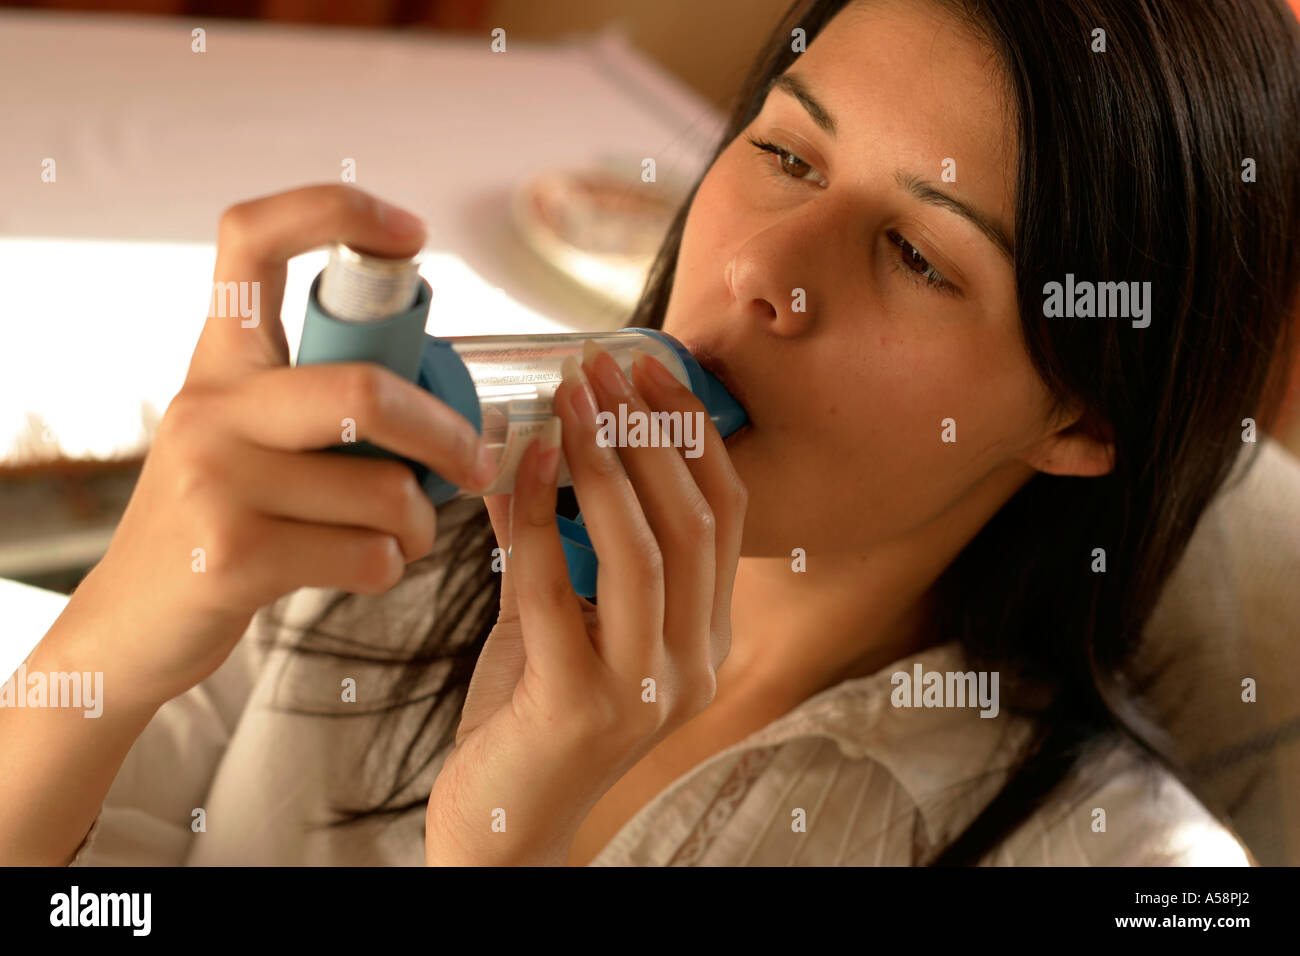 young woman with asthma inhaler Stock Photo